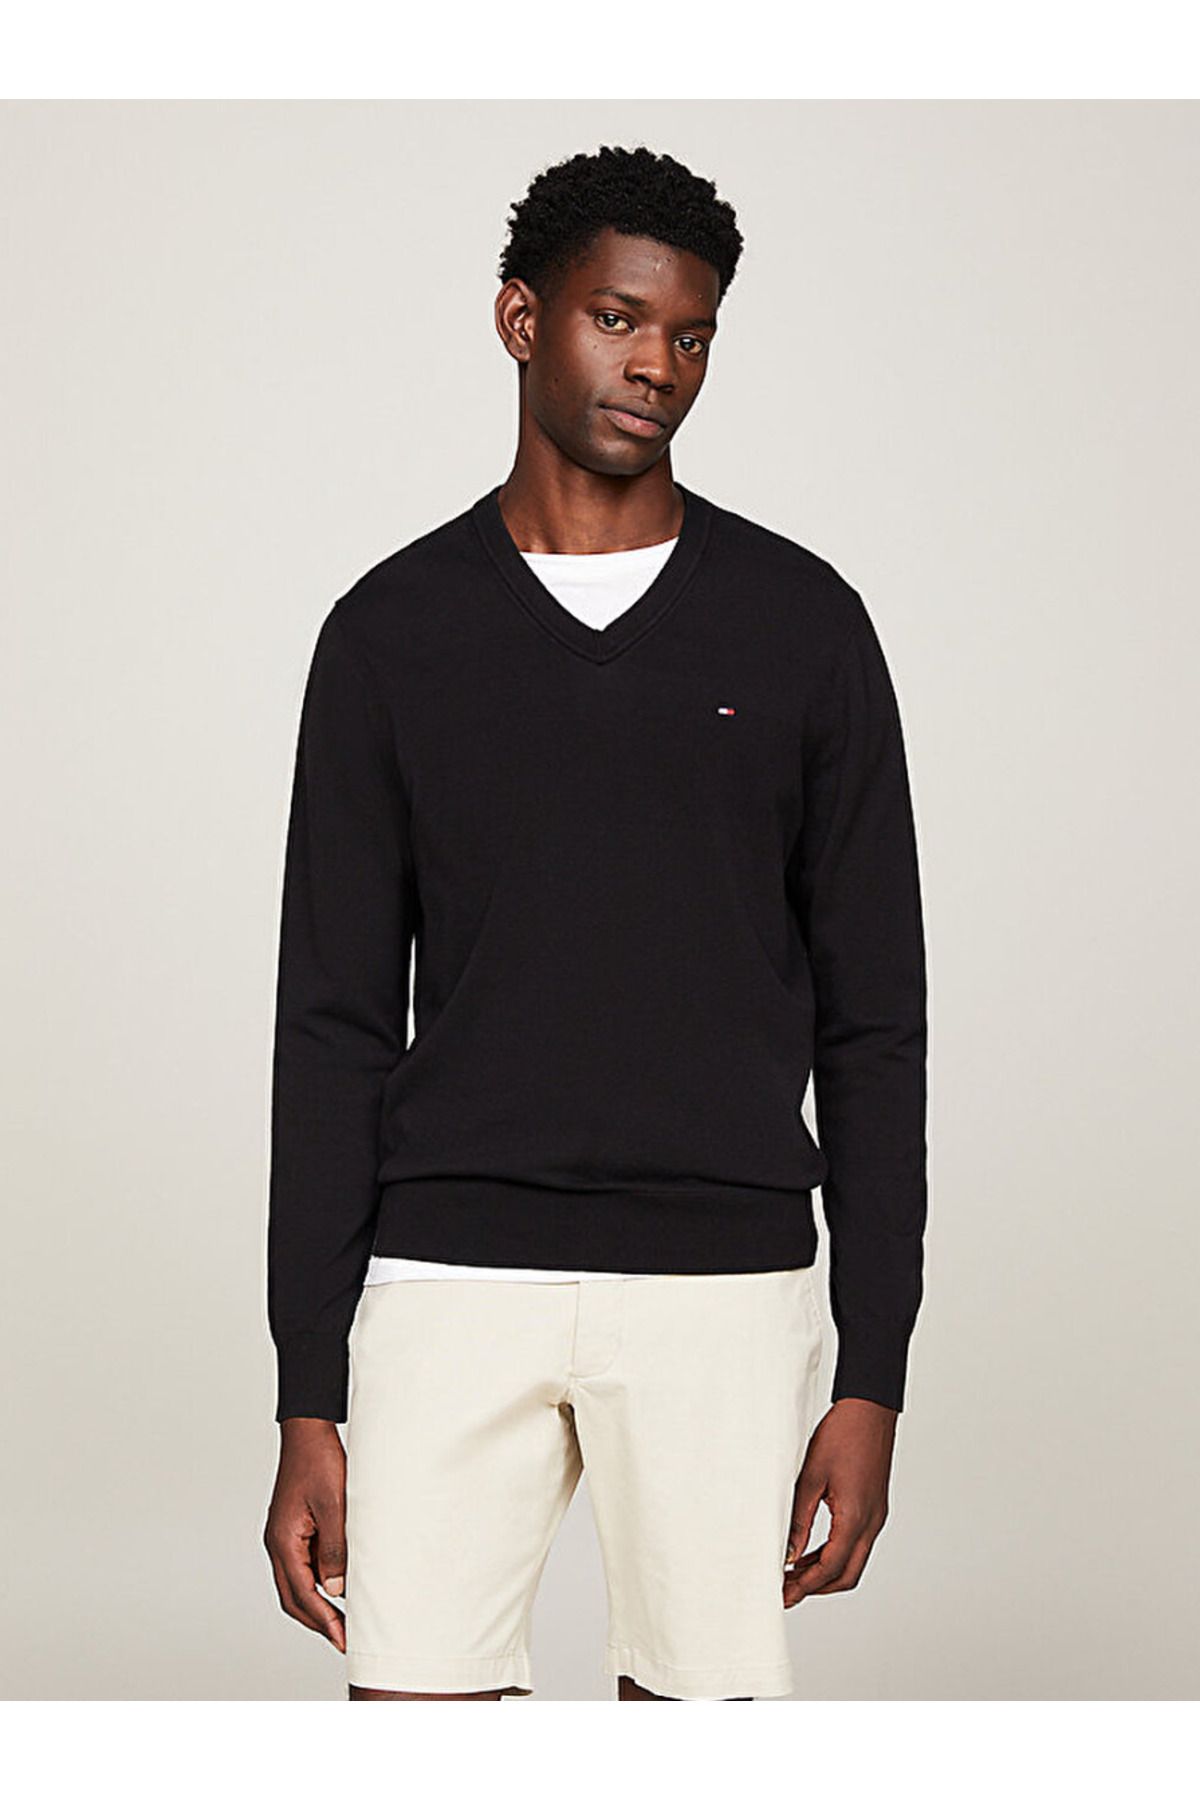 Tommy Hilfiger 1985 Collection Organic Cotton Jumper